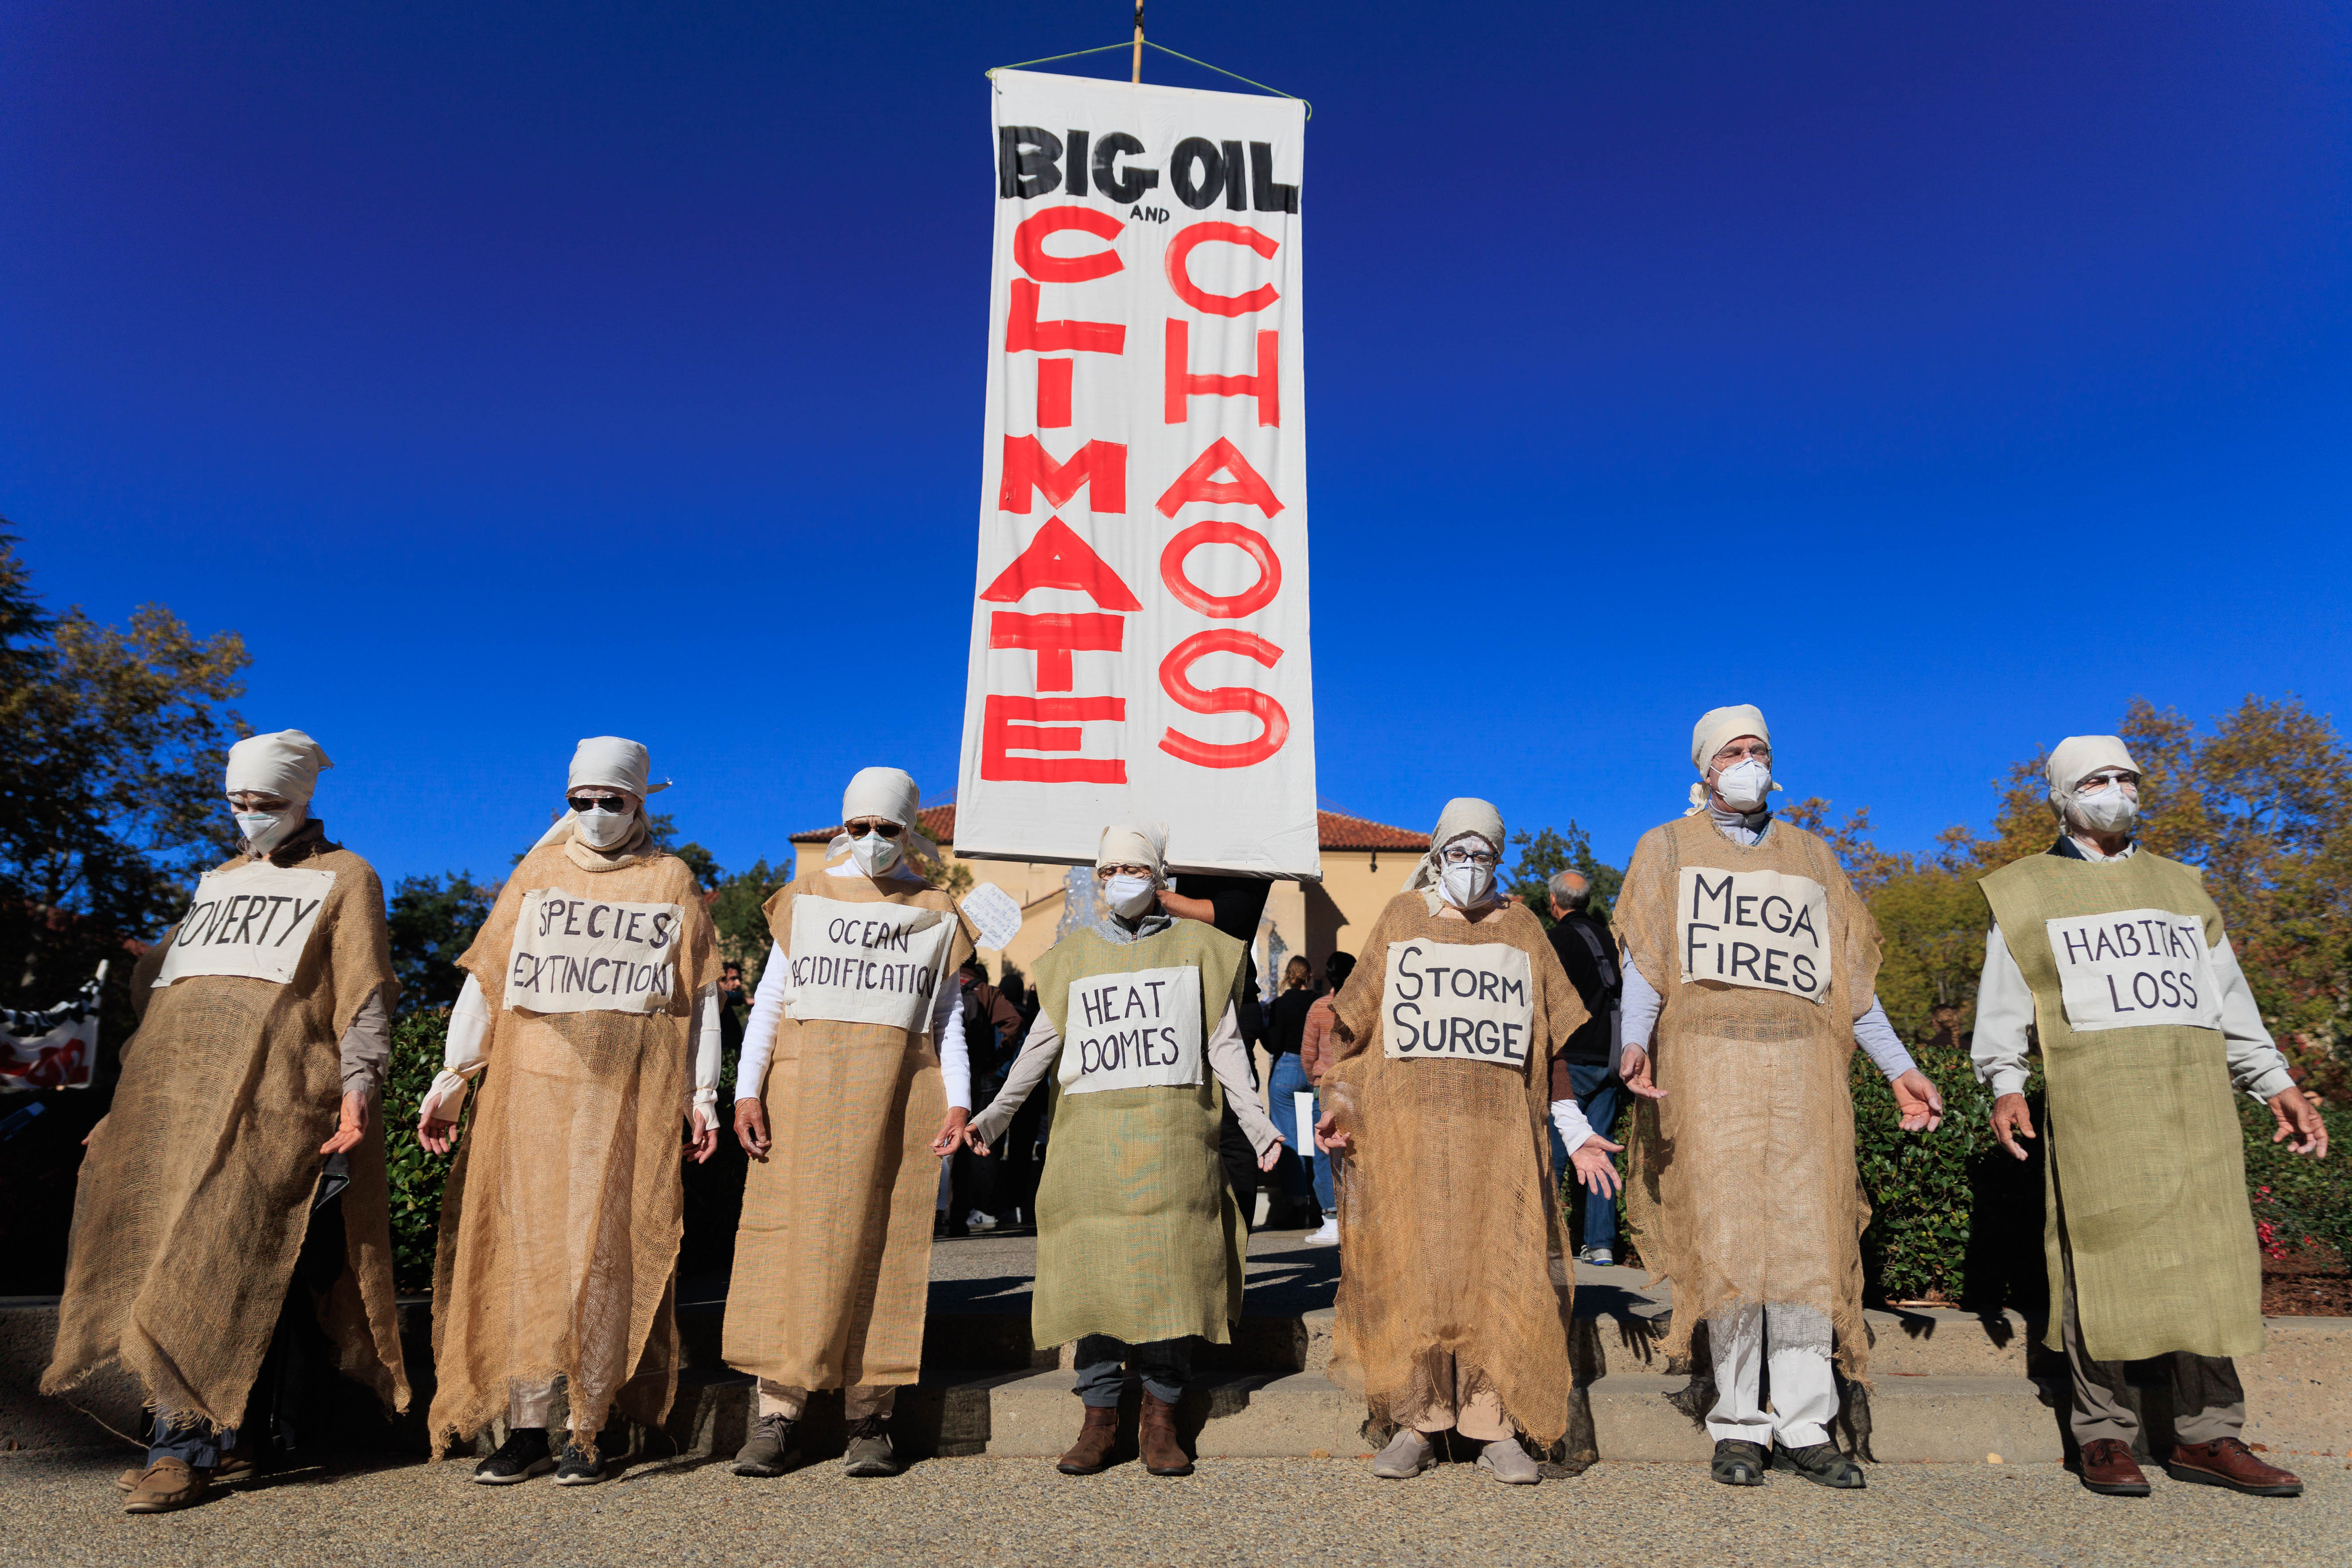 Exxon CEO visits Stanford plugging company's plan for carbon neutrality, sparks protest